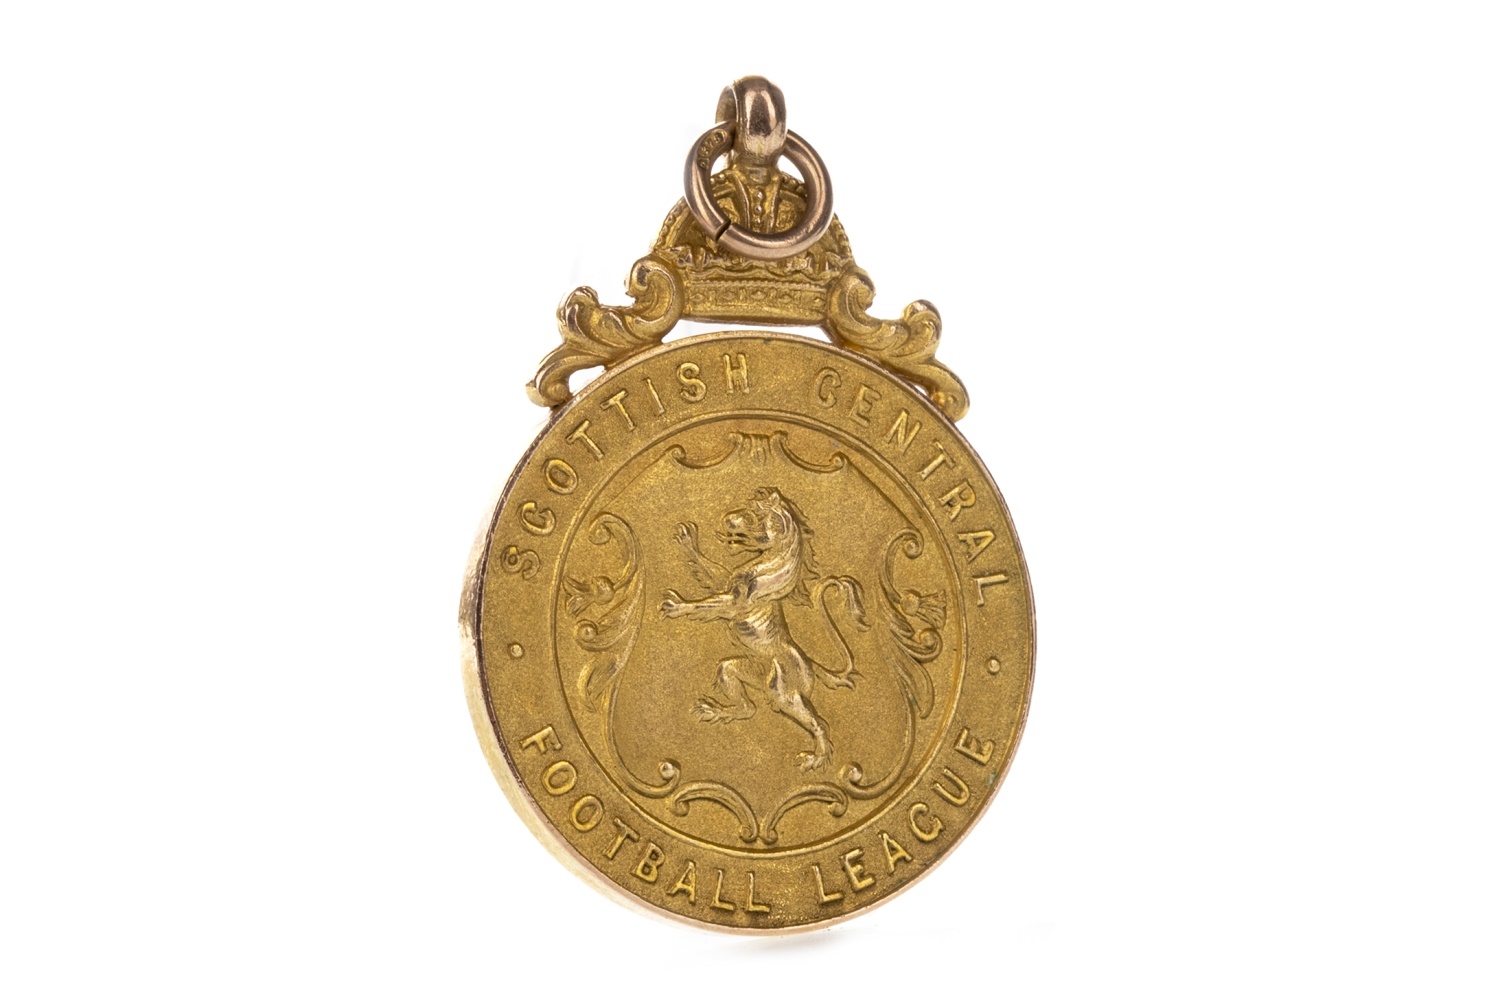 A SCOTTISH CENTRAL FOOTBALL LEAGUE RUNNERS UP GOLD MEDAL 1940